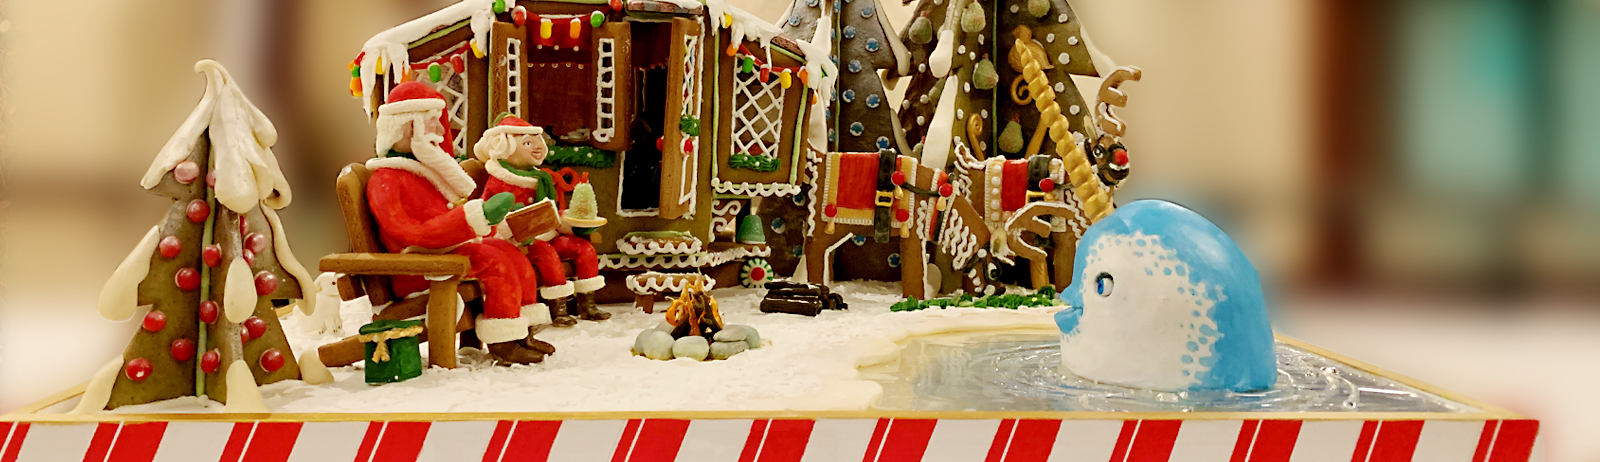 Gingerbread Competition Landing Page Header